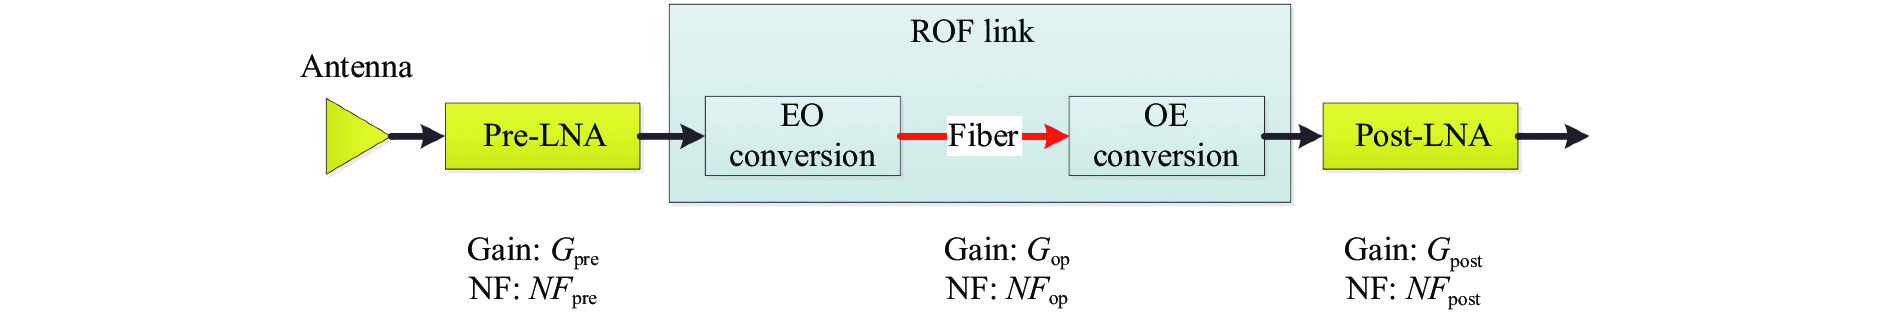 Schematic diagram of receiving link based on ROF